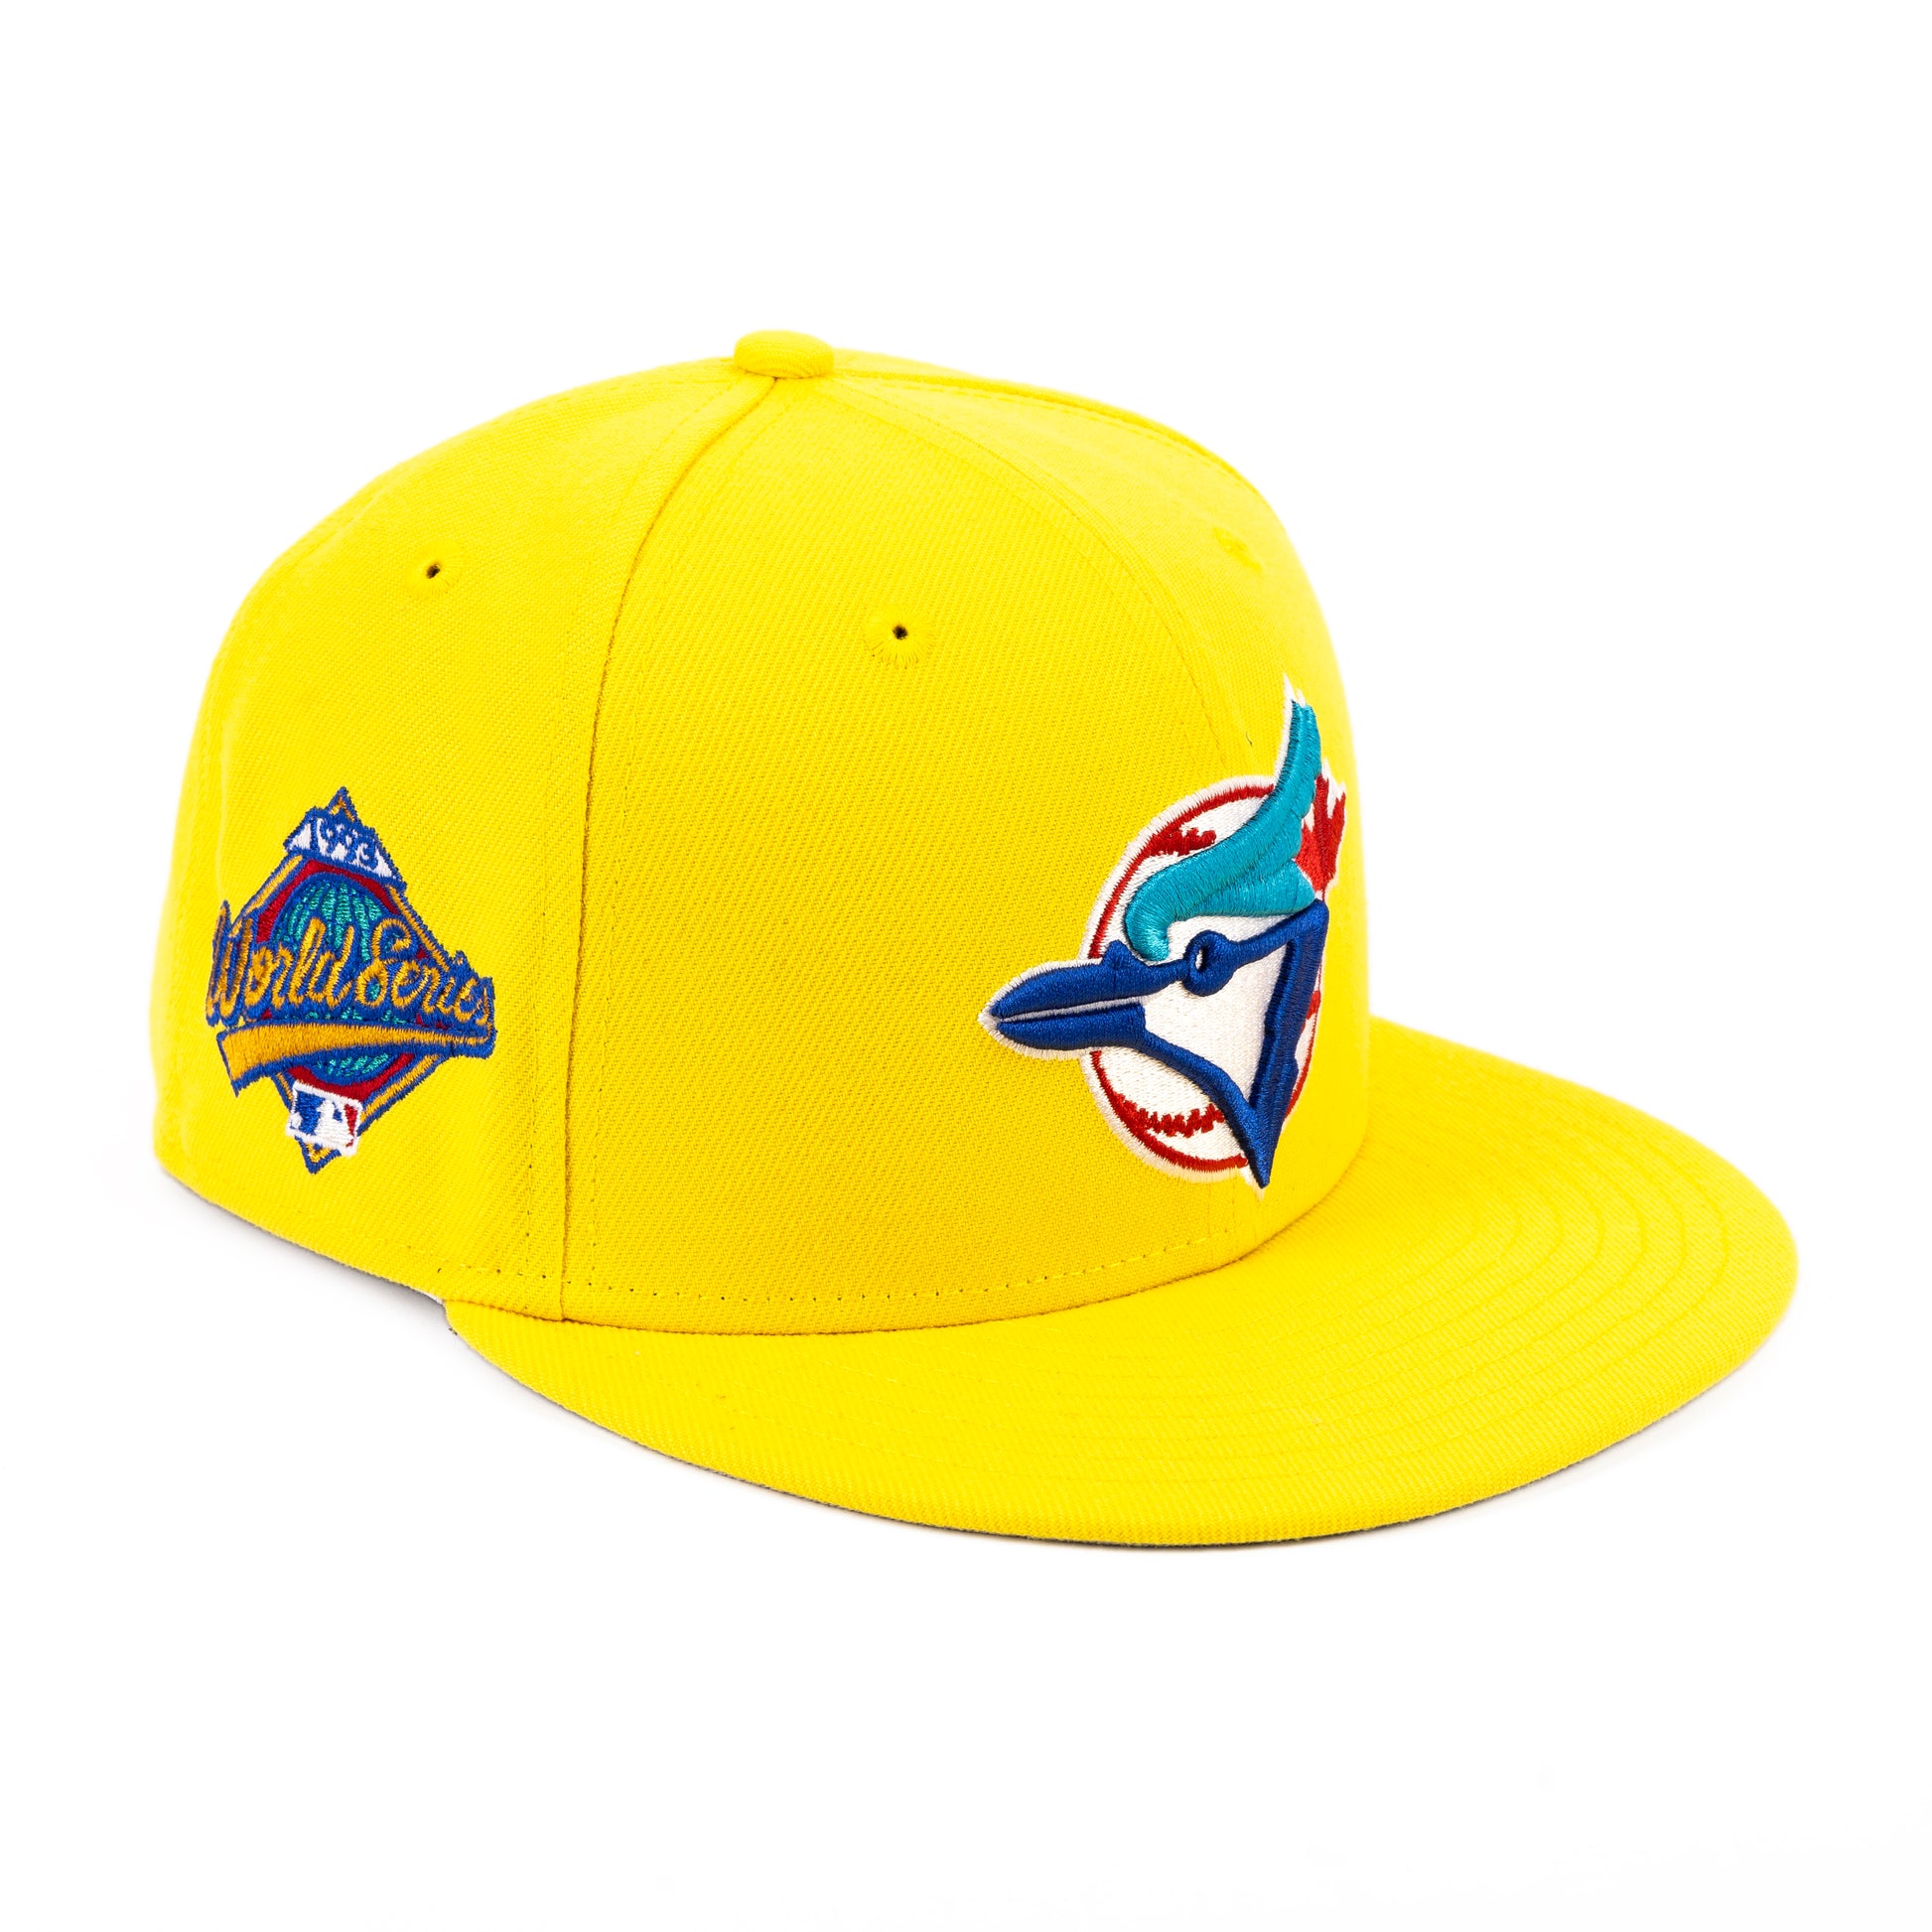 TORONTO BLUE JAYS OFFICIAL YELLOW NEW ERA 59FIFTY HAT